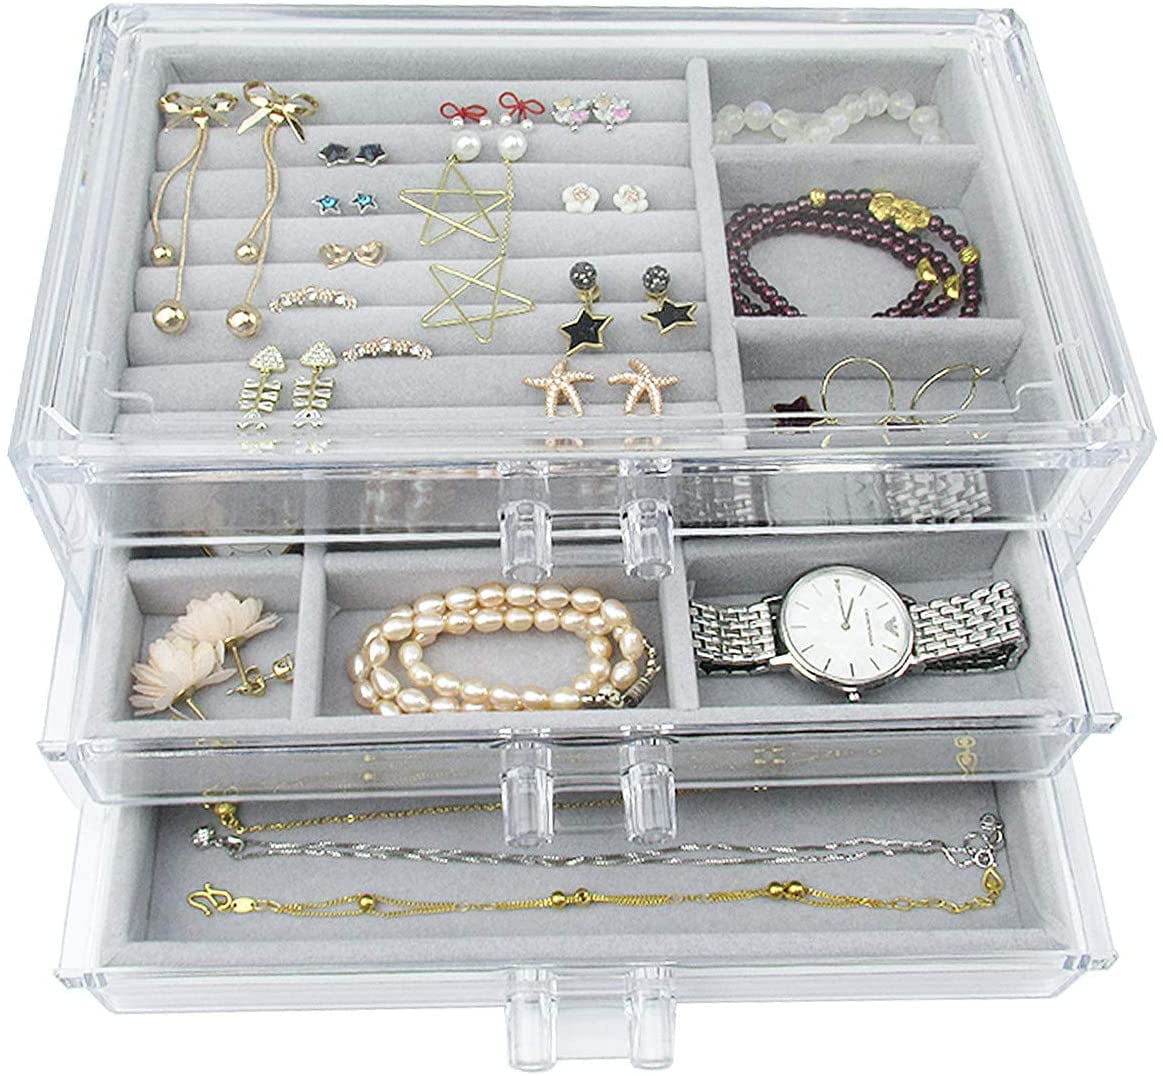 Deluxe Piano Paint Jewelry Travel Case with Mirror Grey Voova Wooden Jewellery Box Organiser for Women Lady Girls Vintage Large Jewellery Storage Boxes Holder for Necklace Earring Rings Bracelet